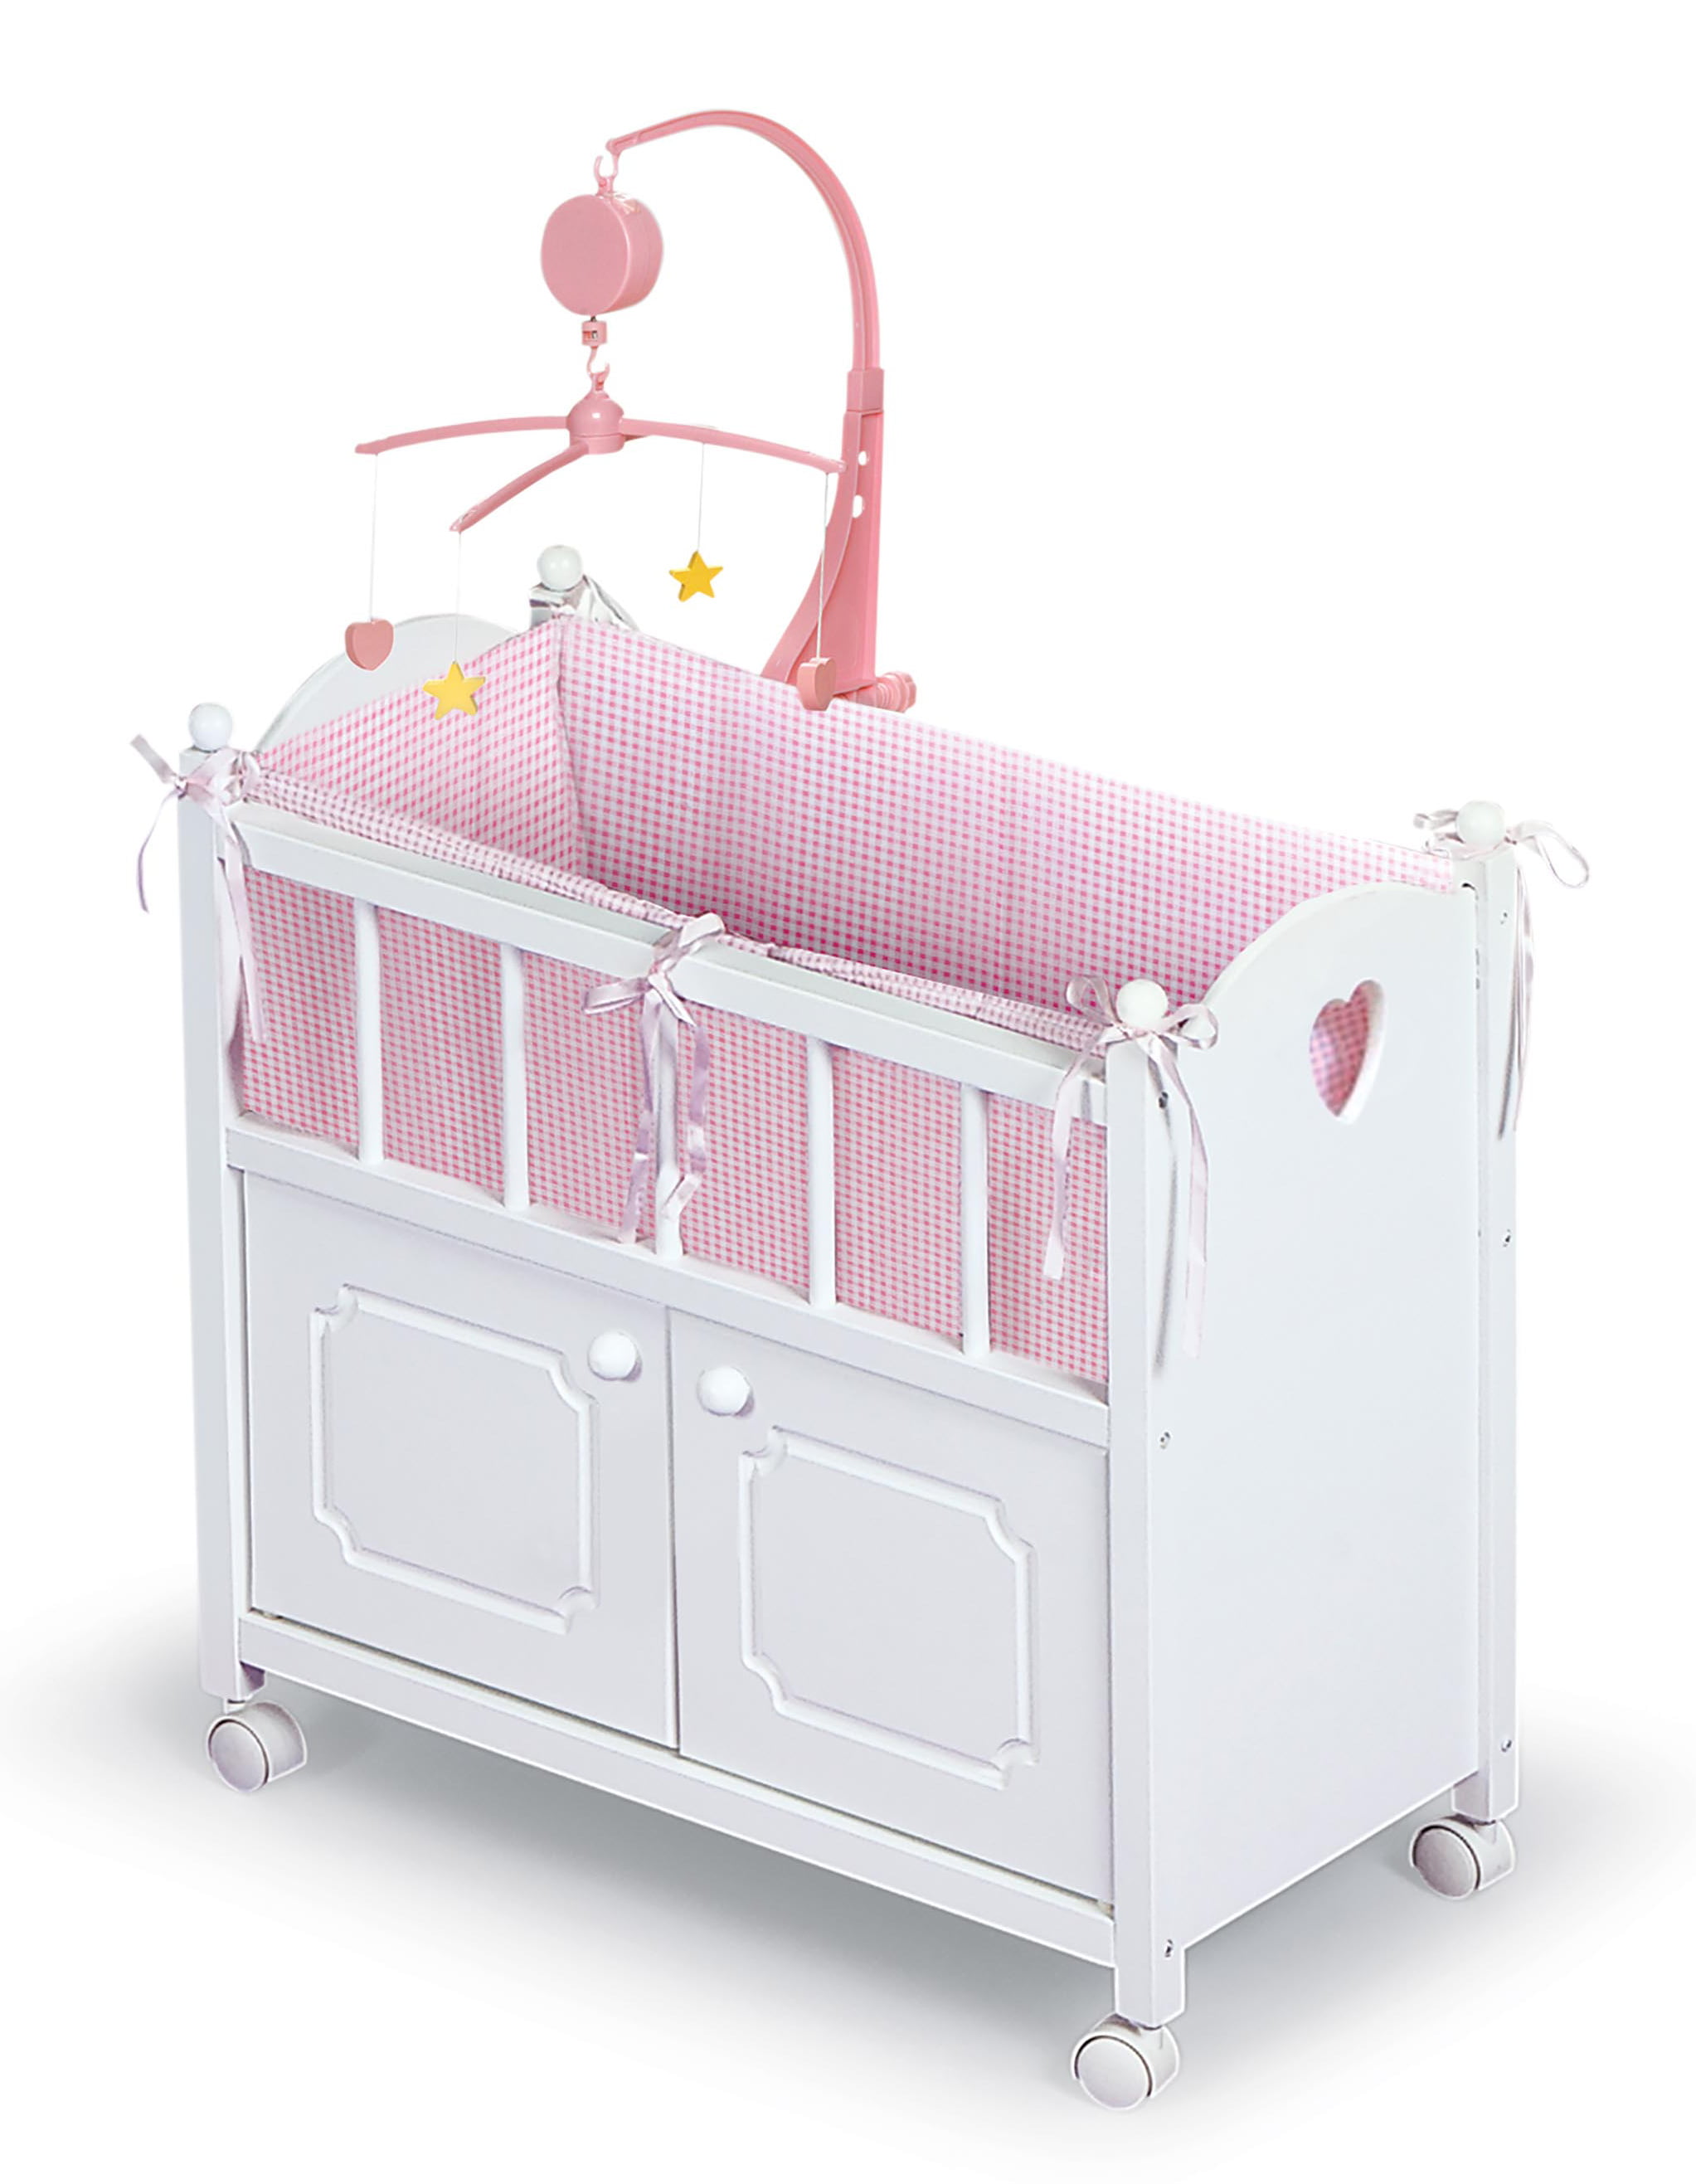 doll beds and cradles